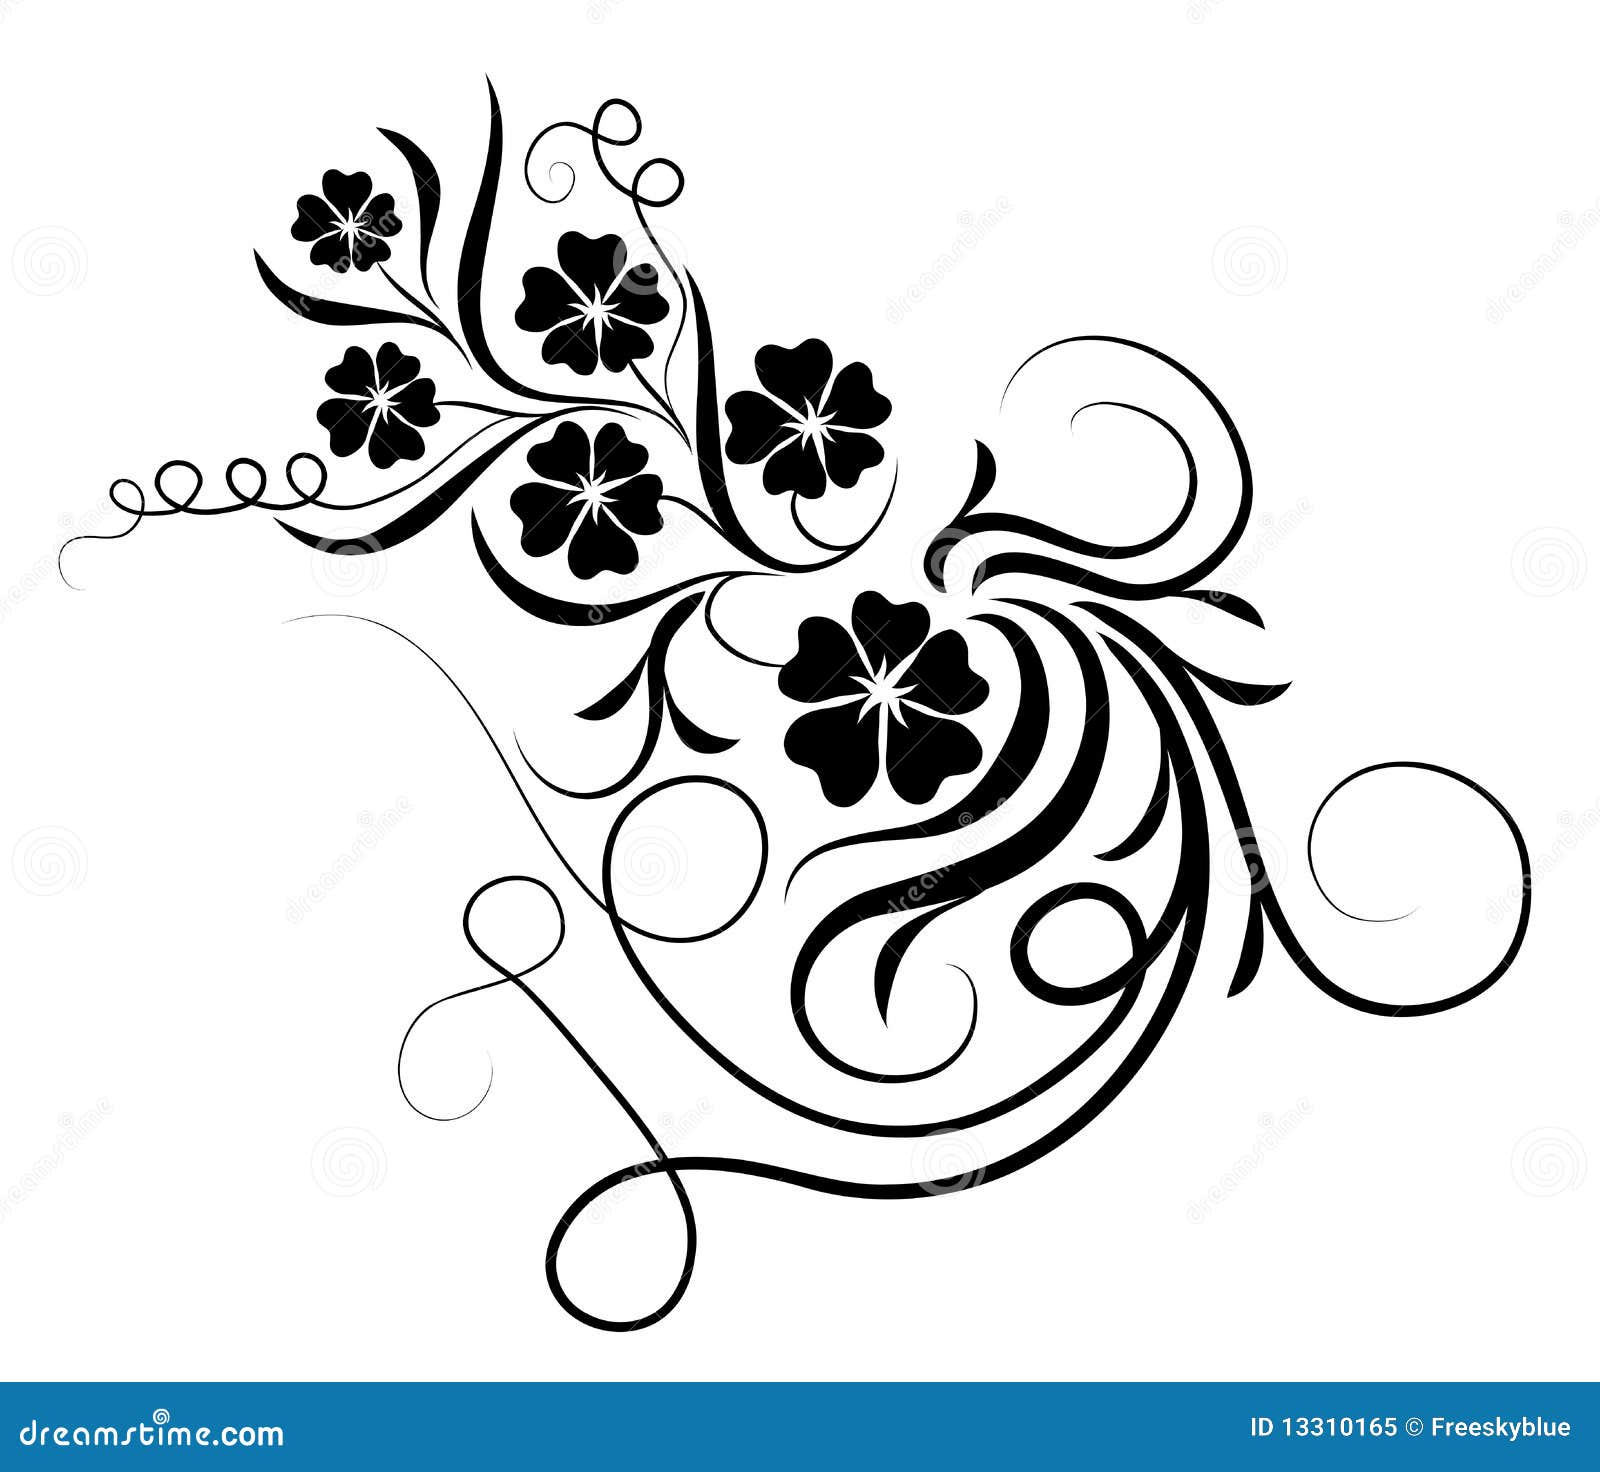 Download Flower And Vines Silhouette Stock Illustration ...